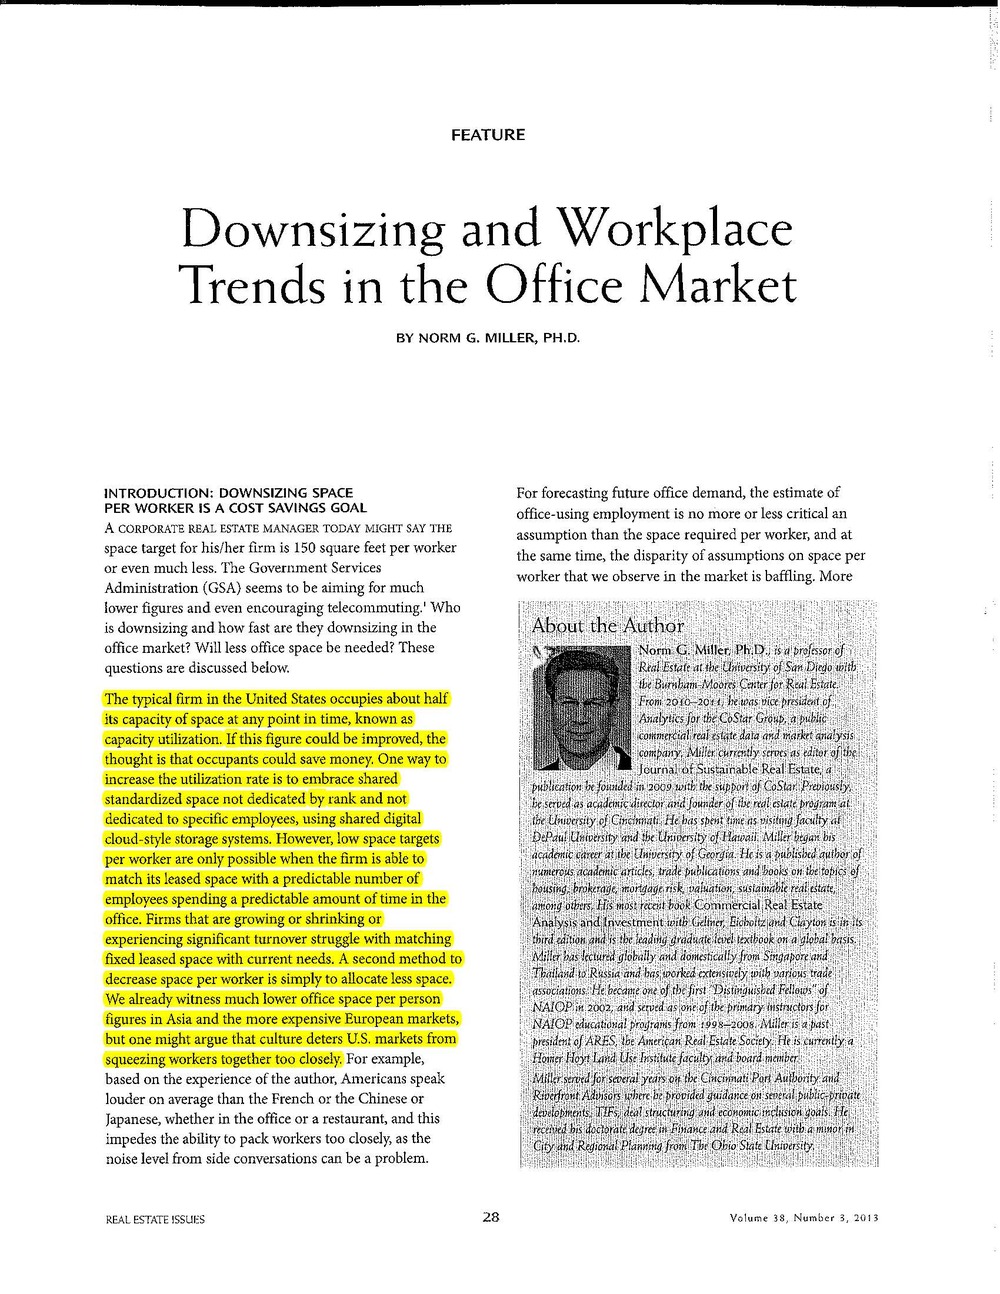 Downsizing and Workplace Trends in the Office Market_Page_1 3